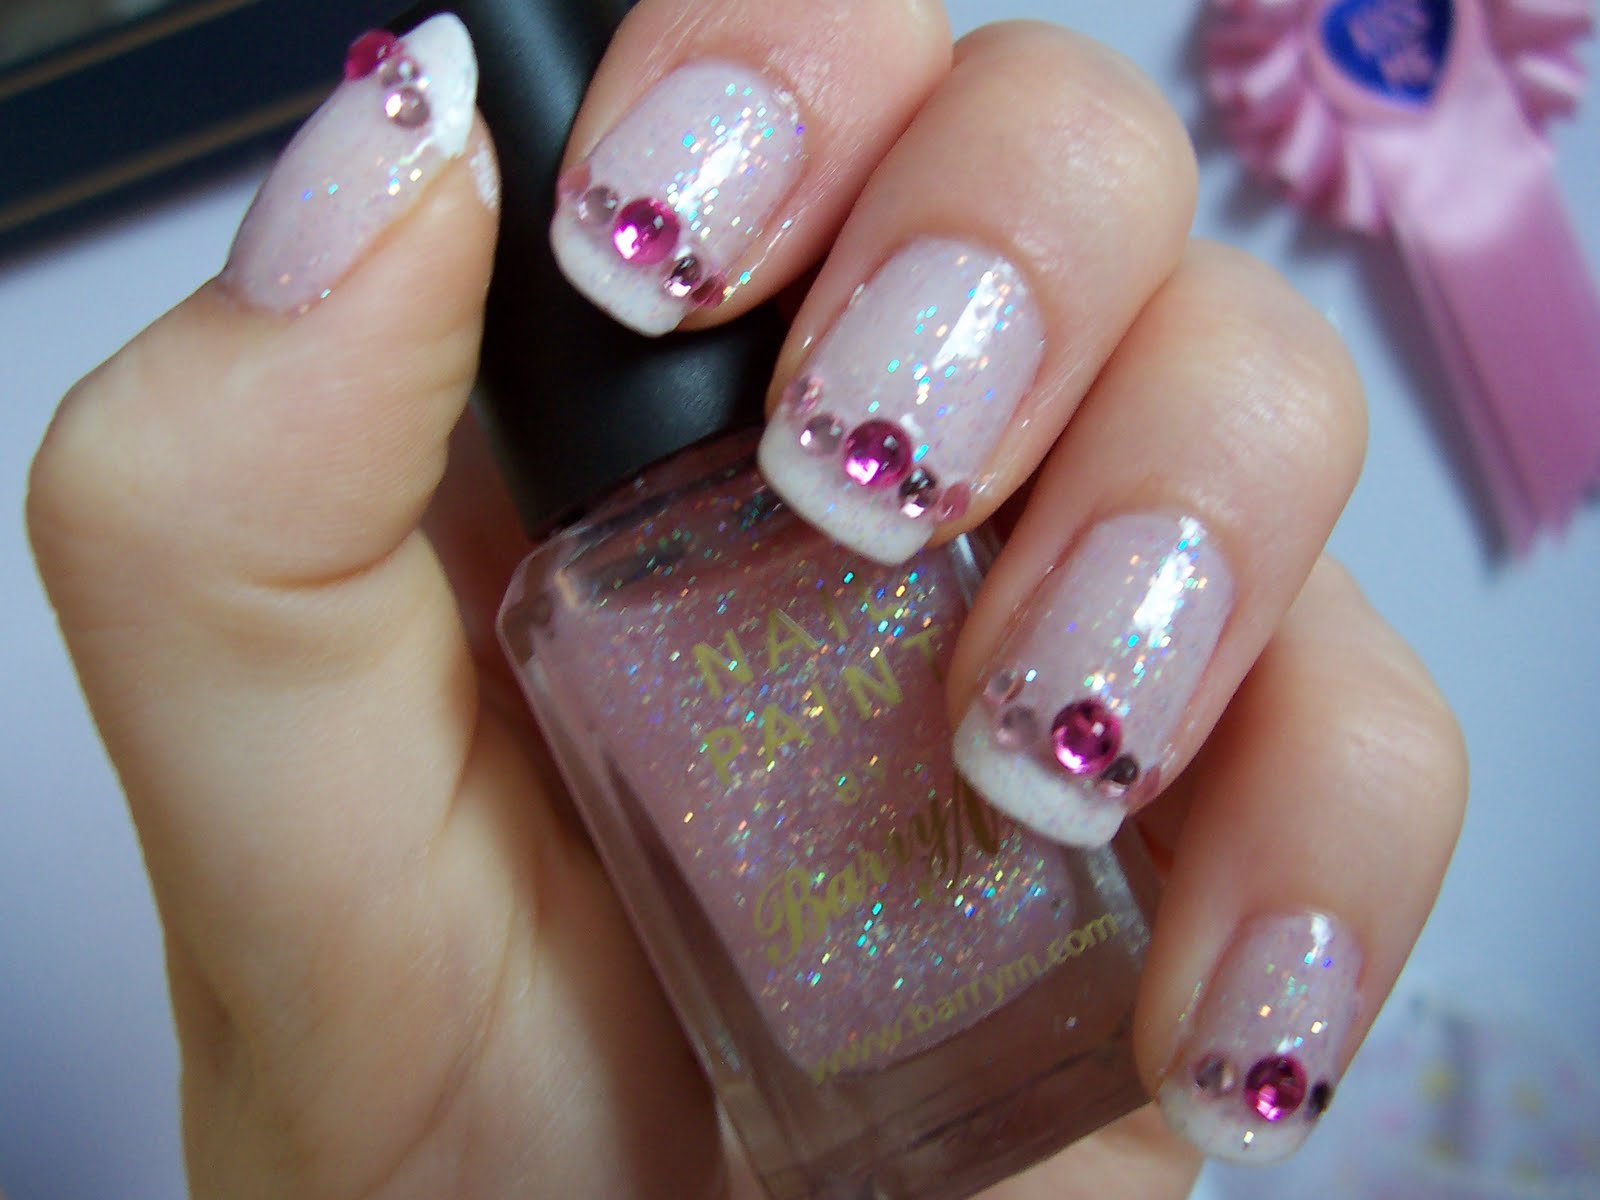 3. Pink and Gold Glitter Nail Art with Gems - wide 10